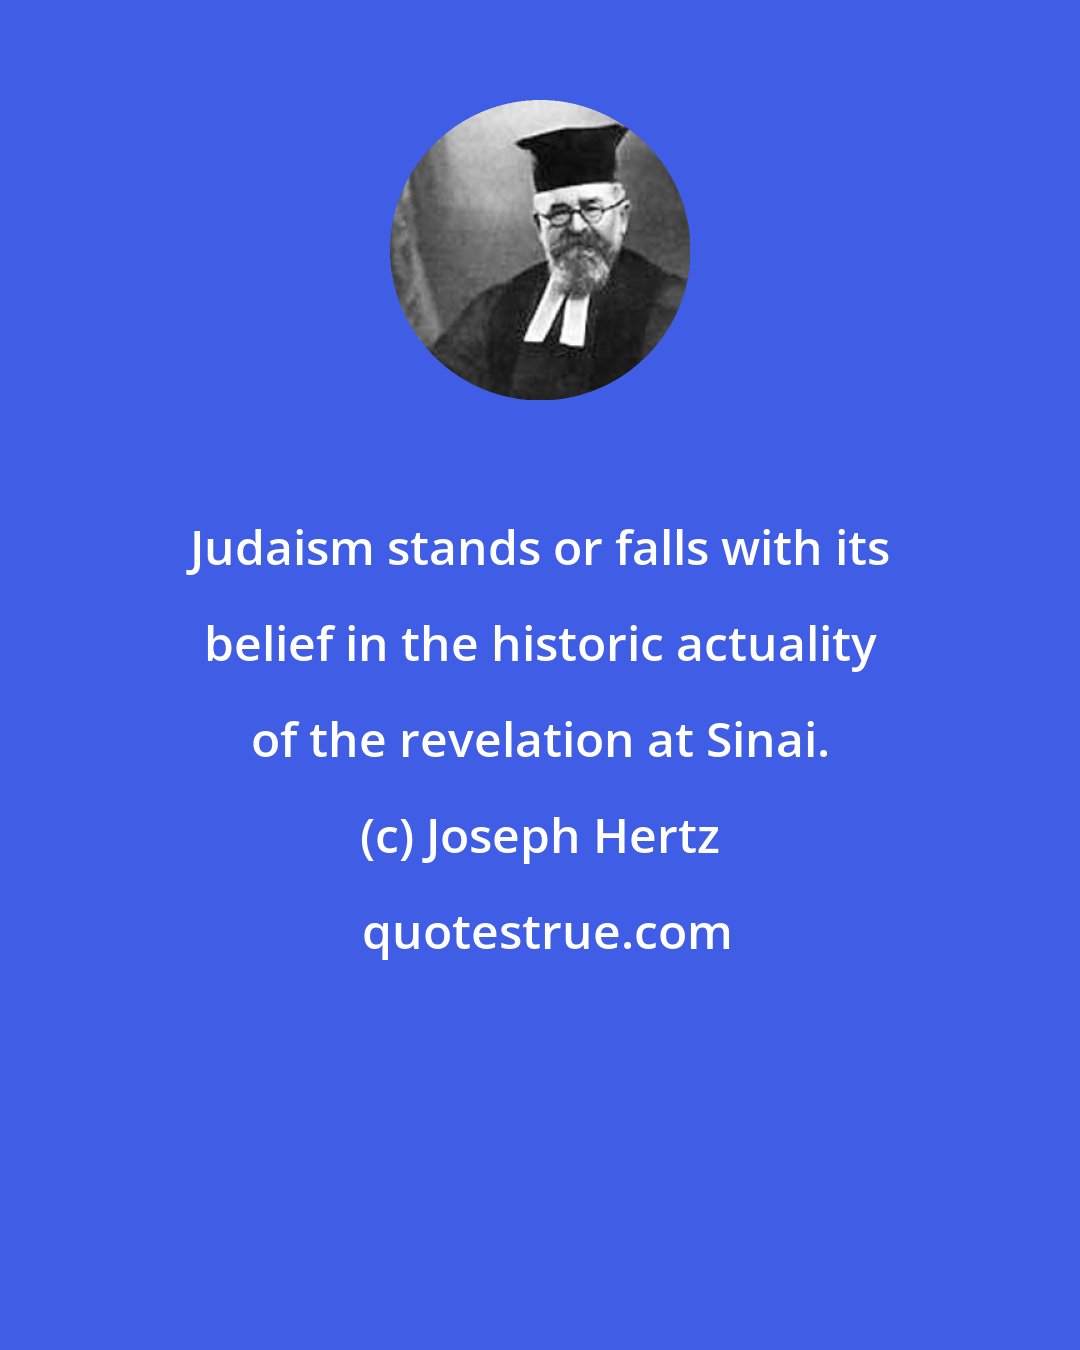 Joseph Hertz: Judaism stands or falls with its belief in the historic actuality of the revelation at Sinai.